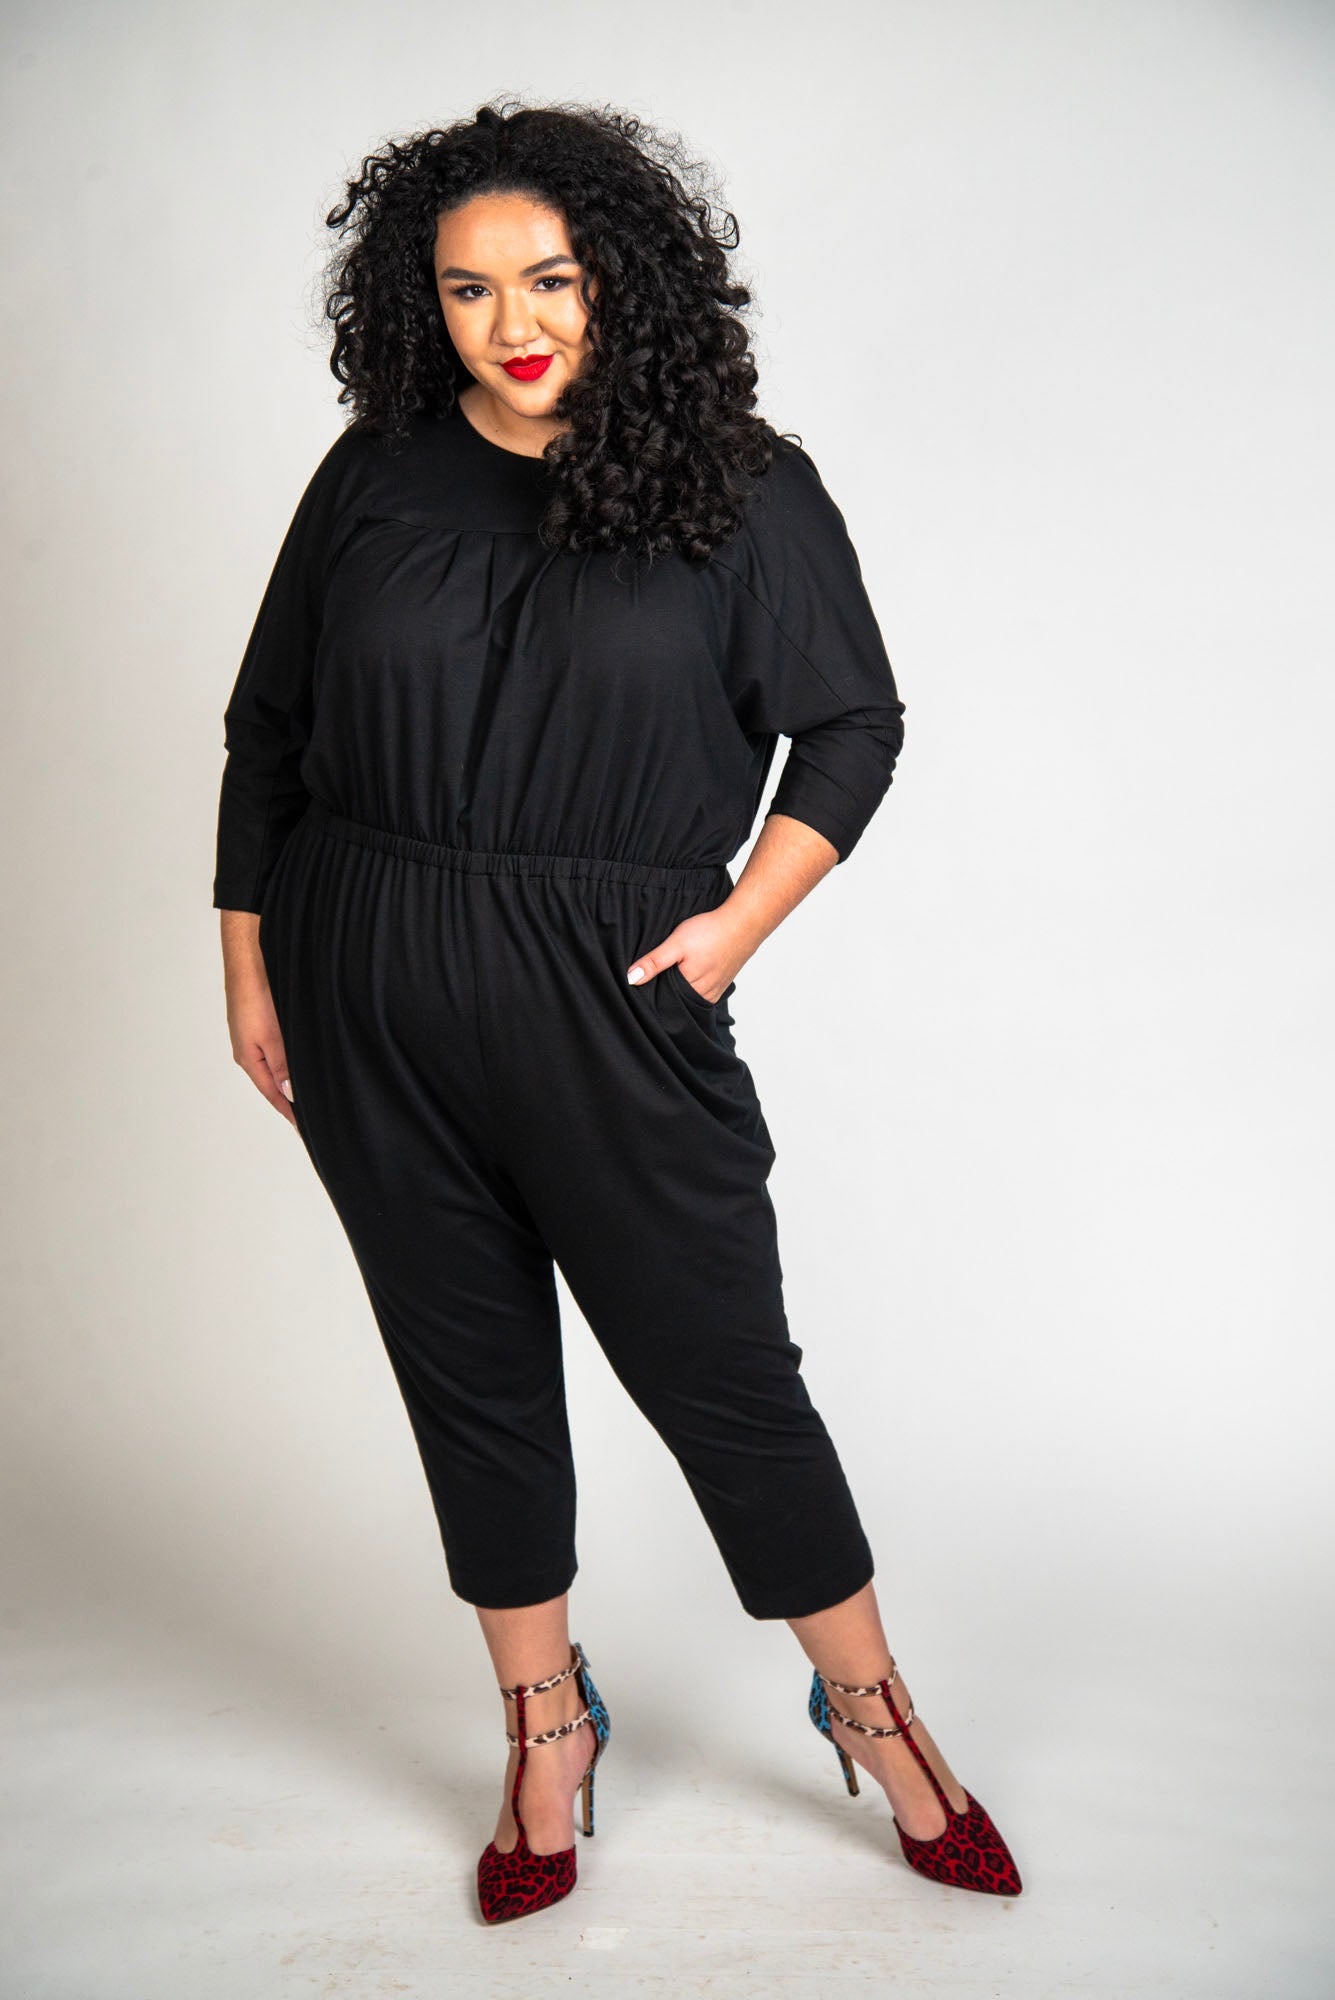 Mayes NYC Alex Back to Front Reversible Jumpsuit Solid color black worn by model Grace Delgado